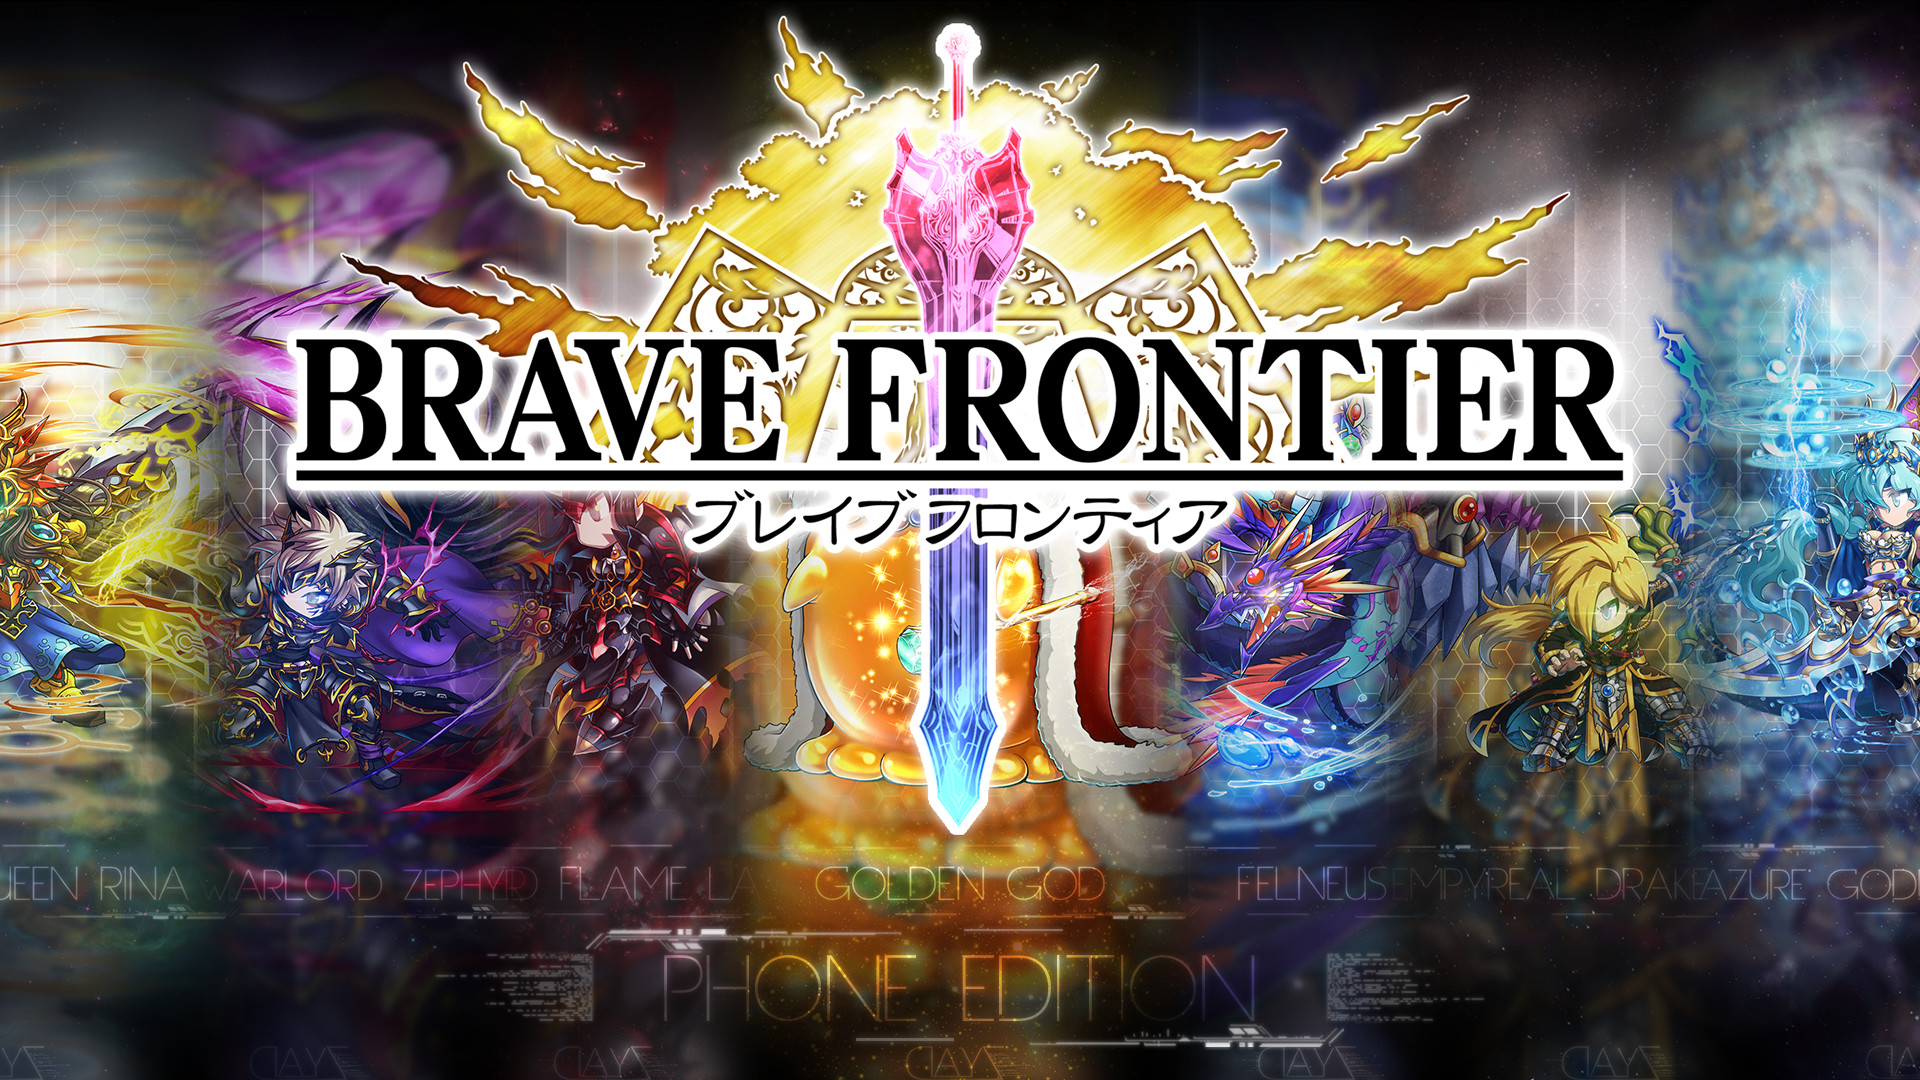 1920x1080 Brave Frontier Wallpapers [PHONE EDITION 2] by forgotten5p1rit on 